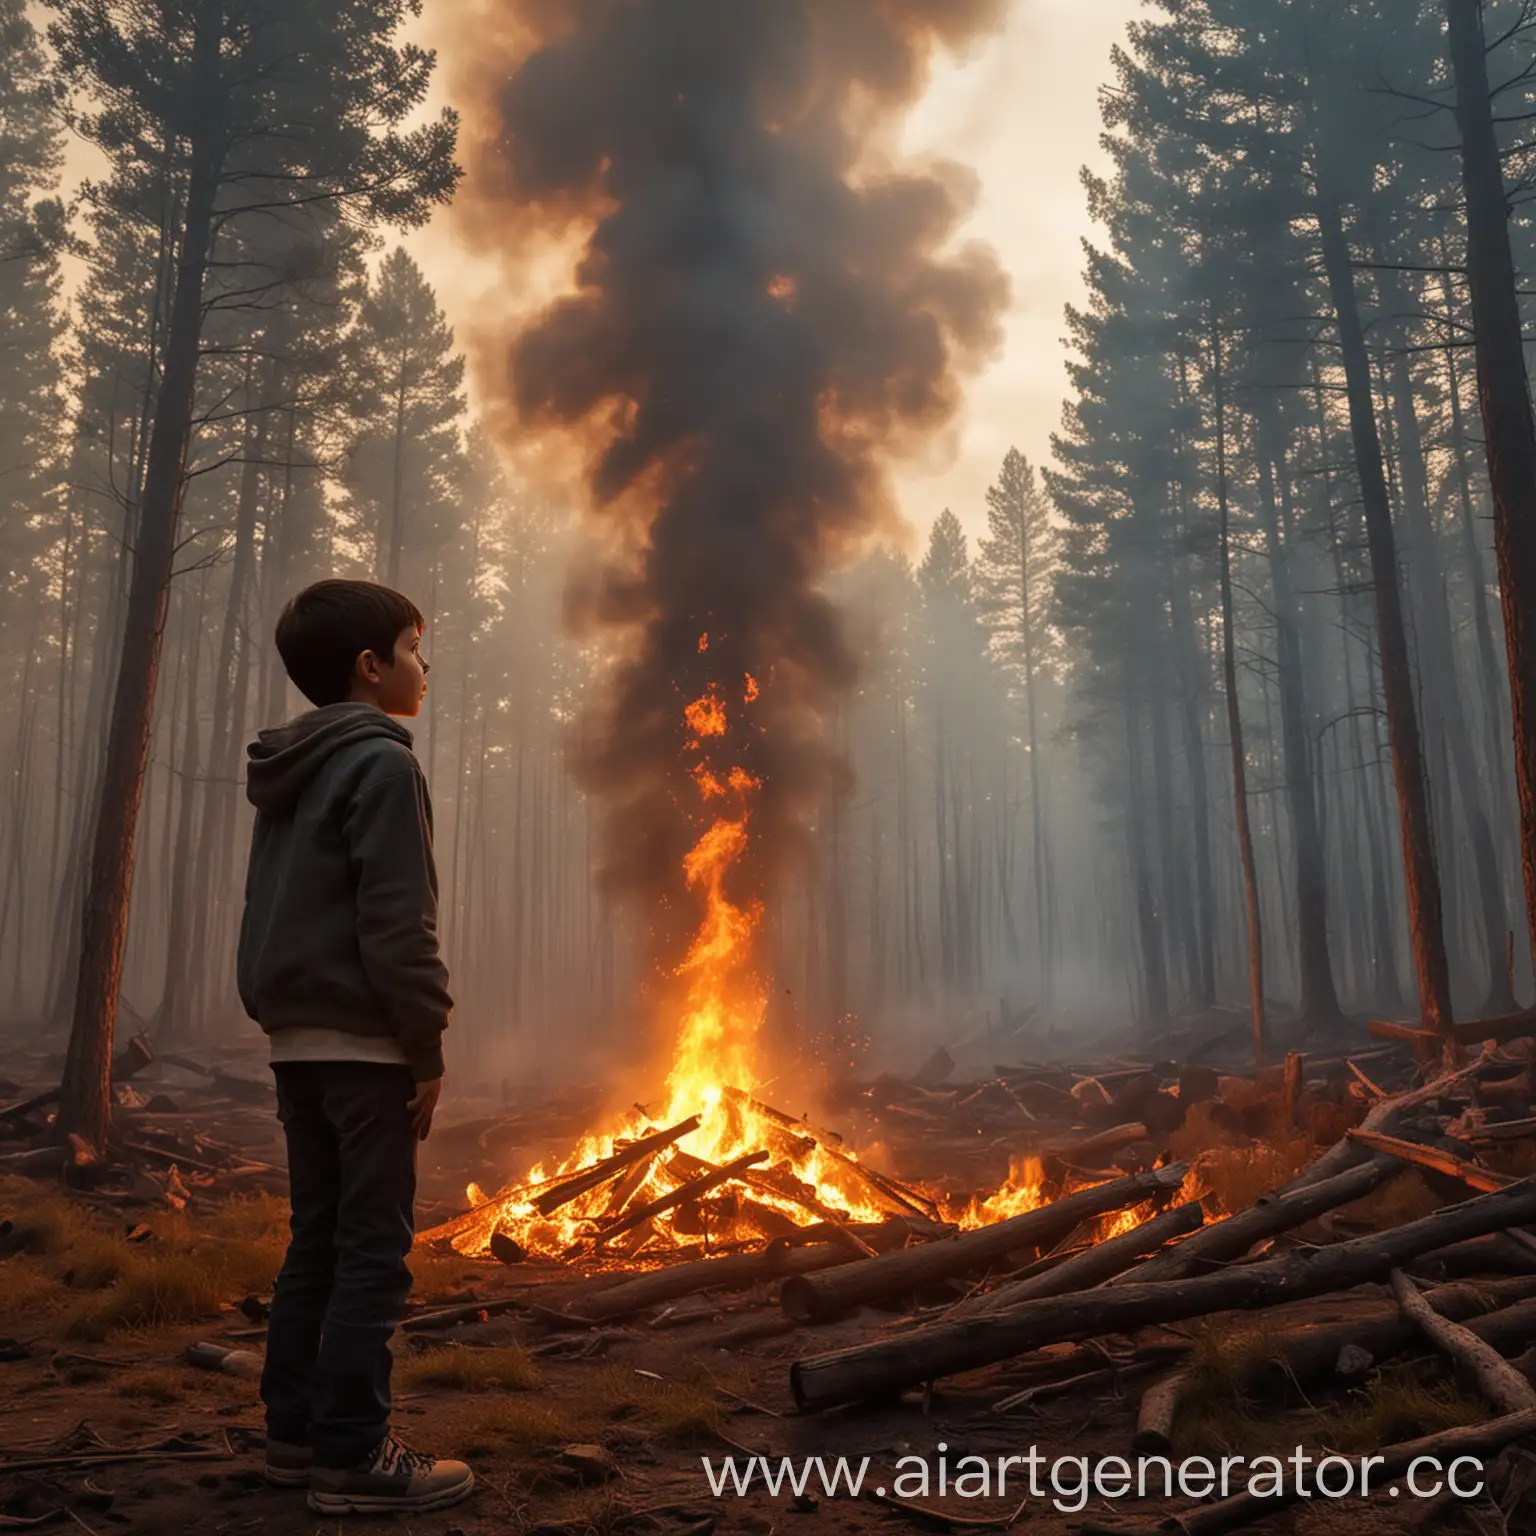 Curious-Boy-Observing-Forest-Fire-Scene